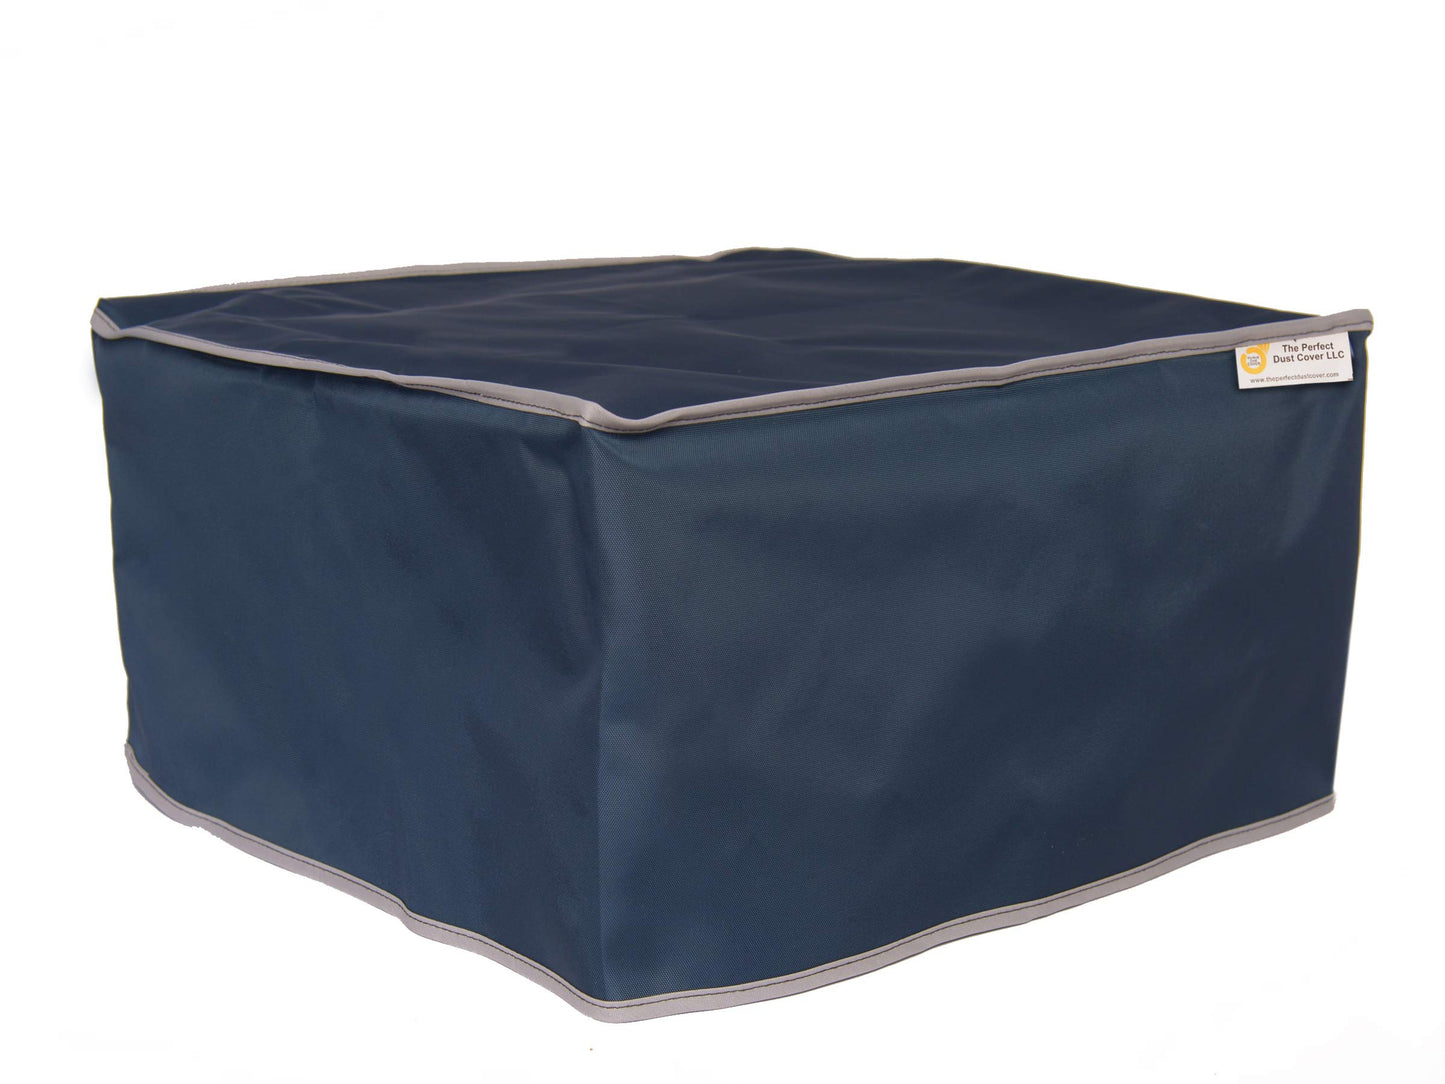 The Perfect Dust Cover, Navy Blue Nylon Cover for Okidata Pro 9541WT Digital Transfer Printer, Anti Static Waterproof Cover Dimensions 27.5''W x 26.2''D x 25.2''H by The Perfect Dust Cover LLC